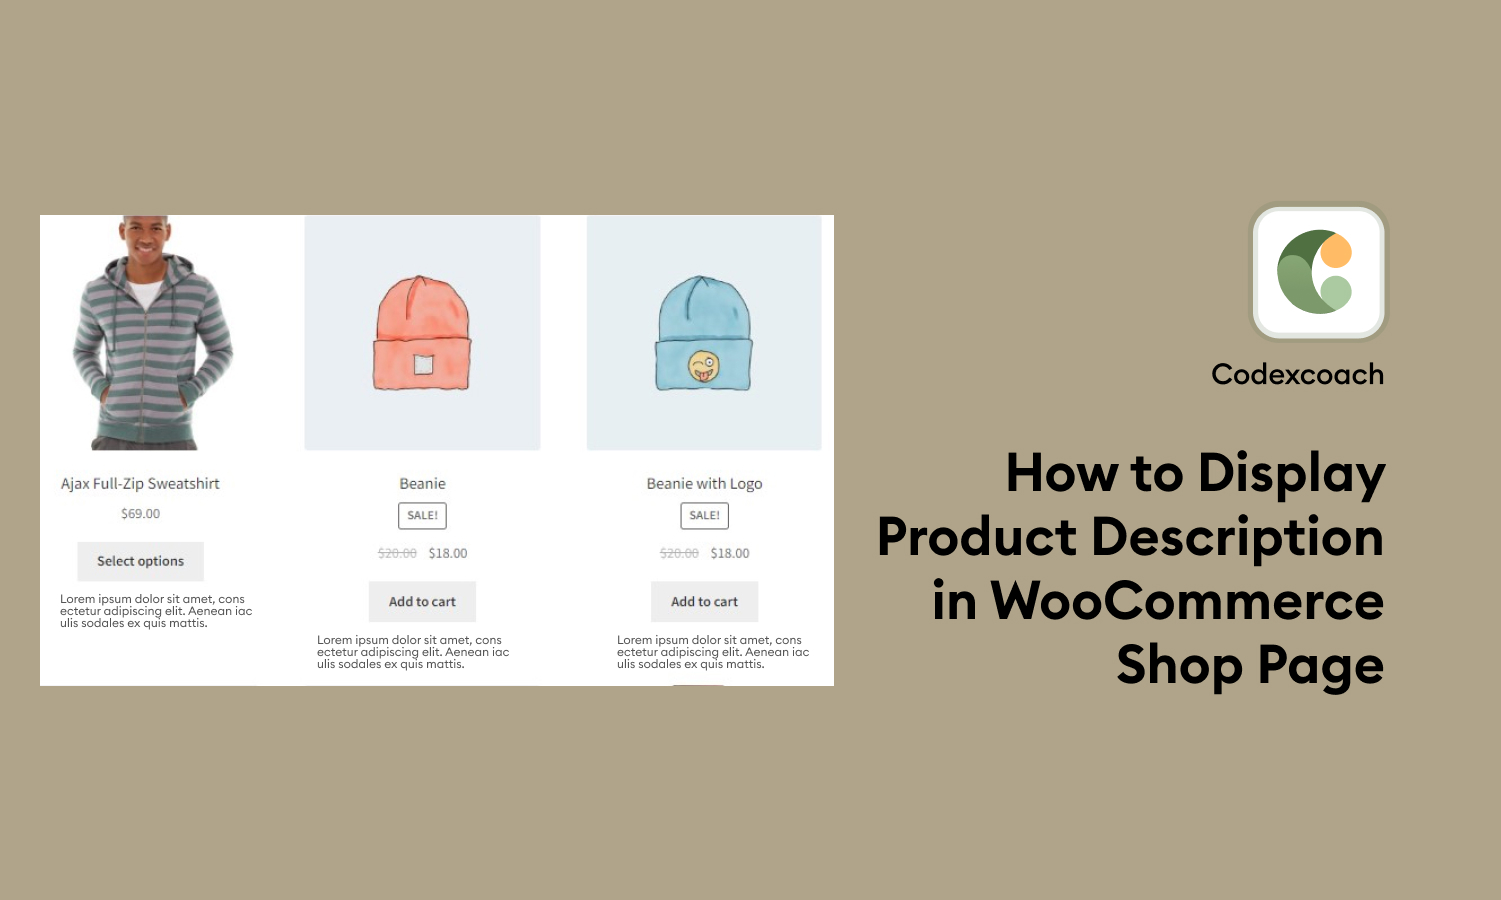 How to Display Product Description in WooCommerce Shop Page